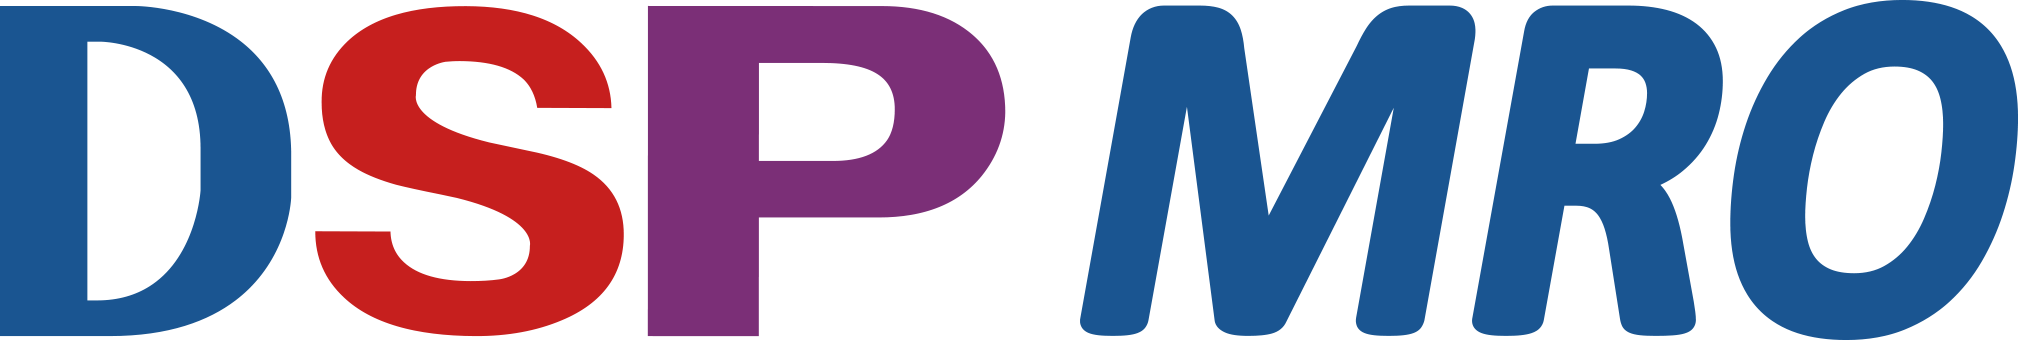 dspmro_logo_all_a.png